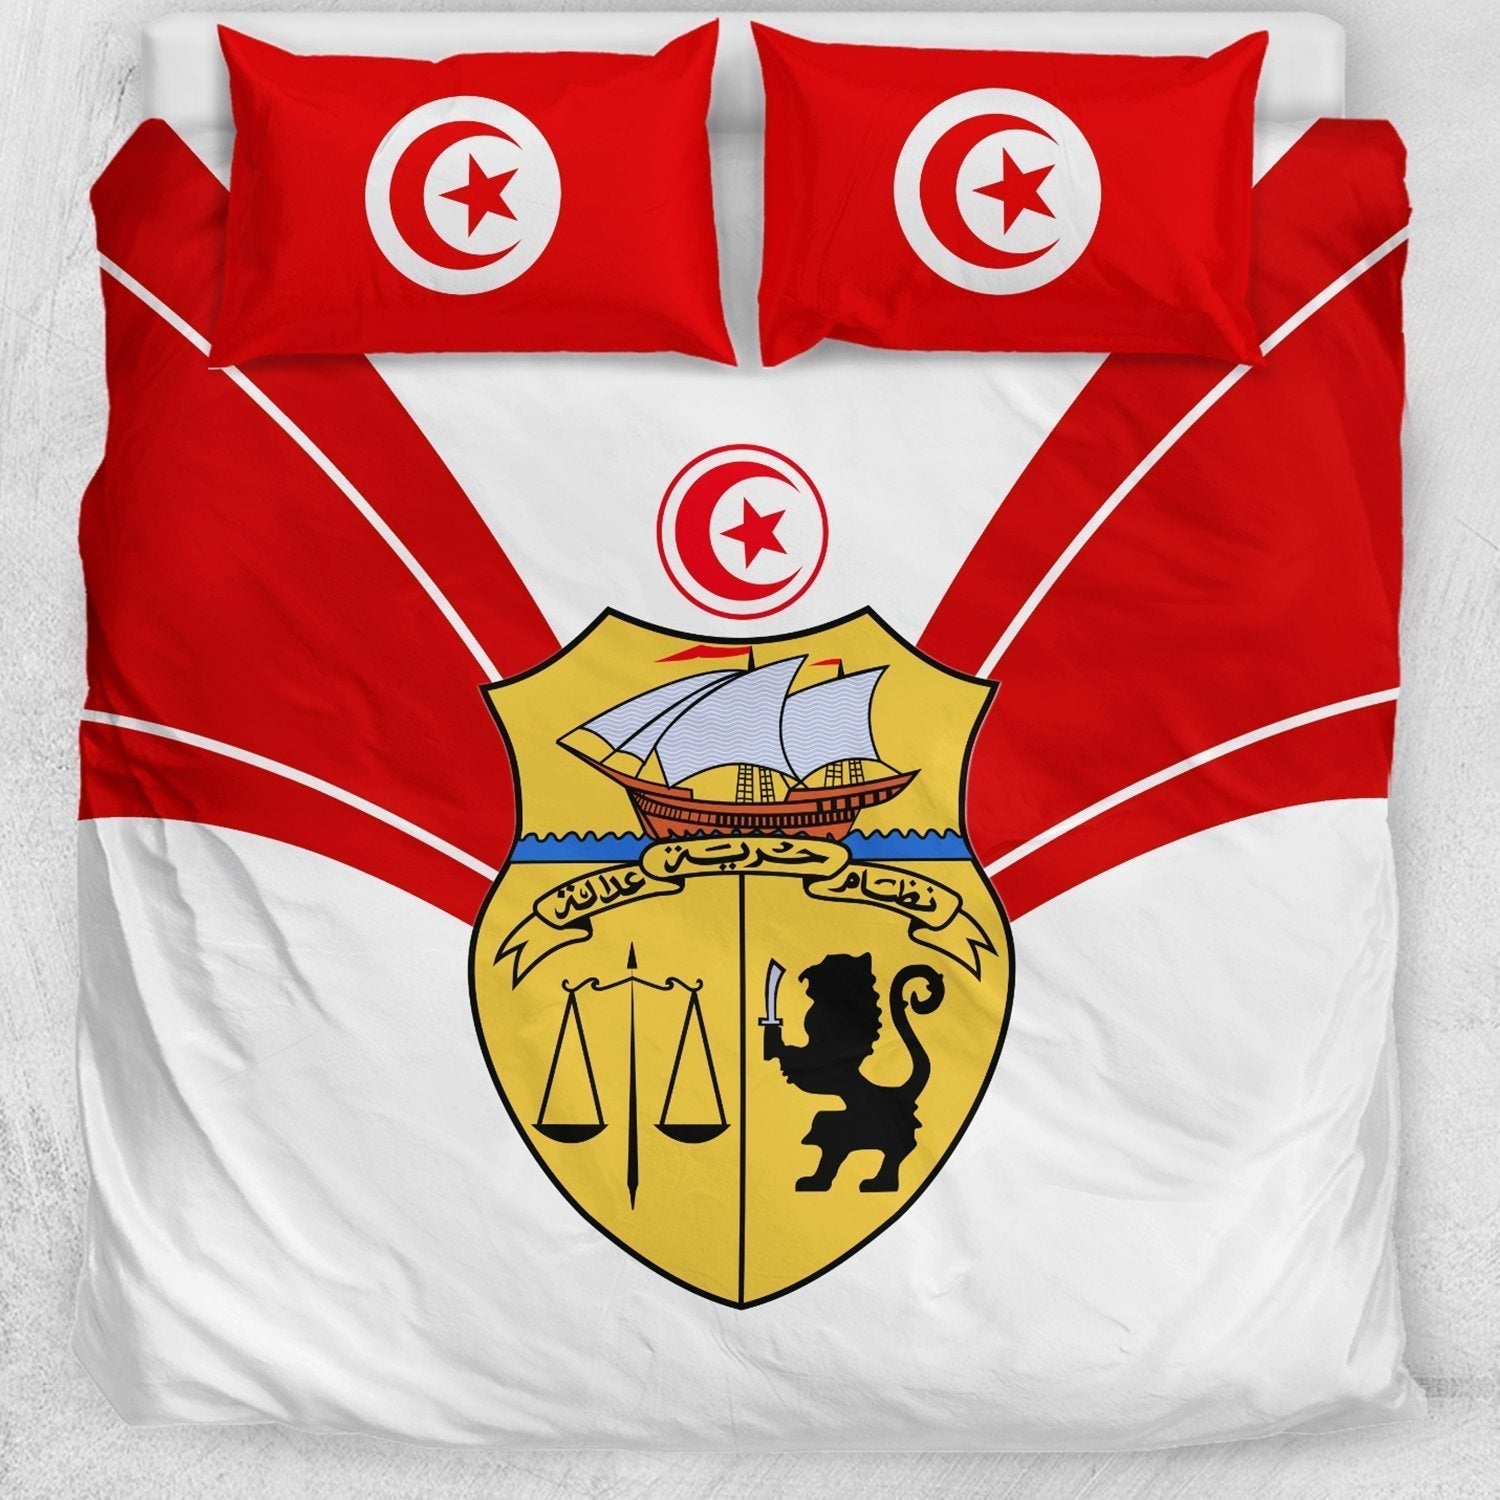 african-bedding-set-tunisia-duvet-cover-pillow-cases-tusk-style